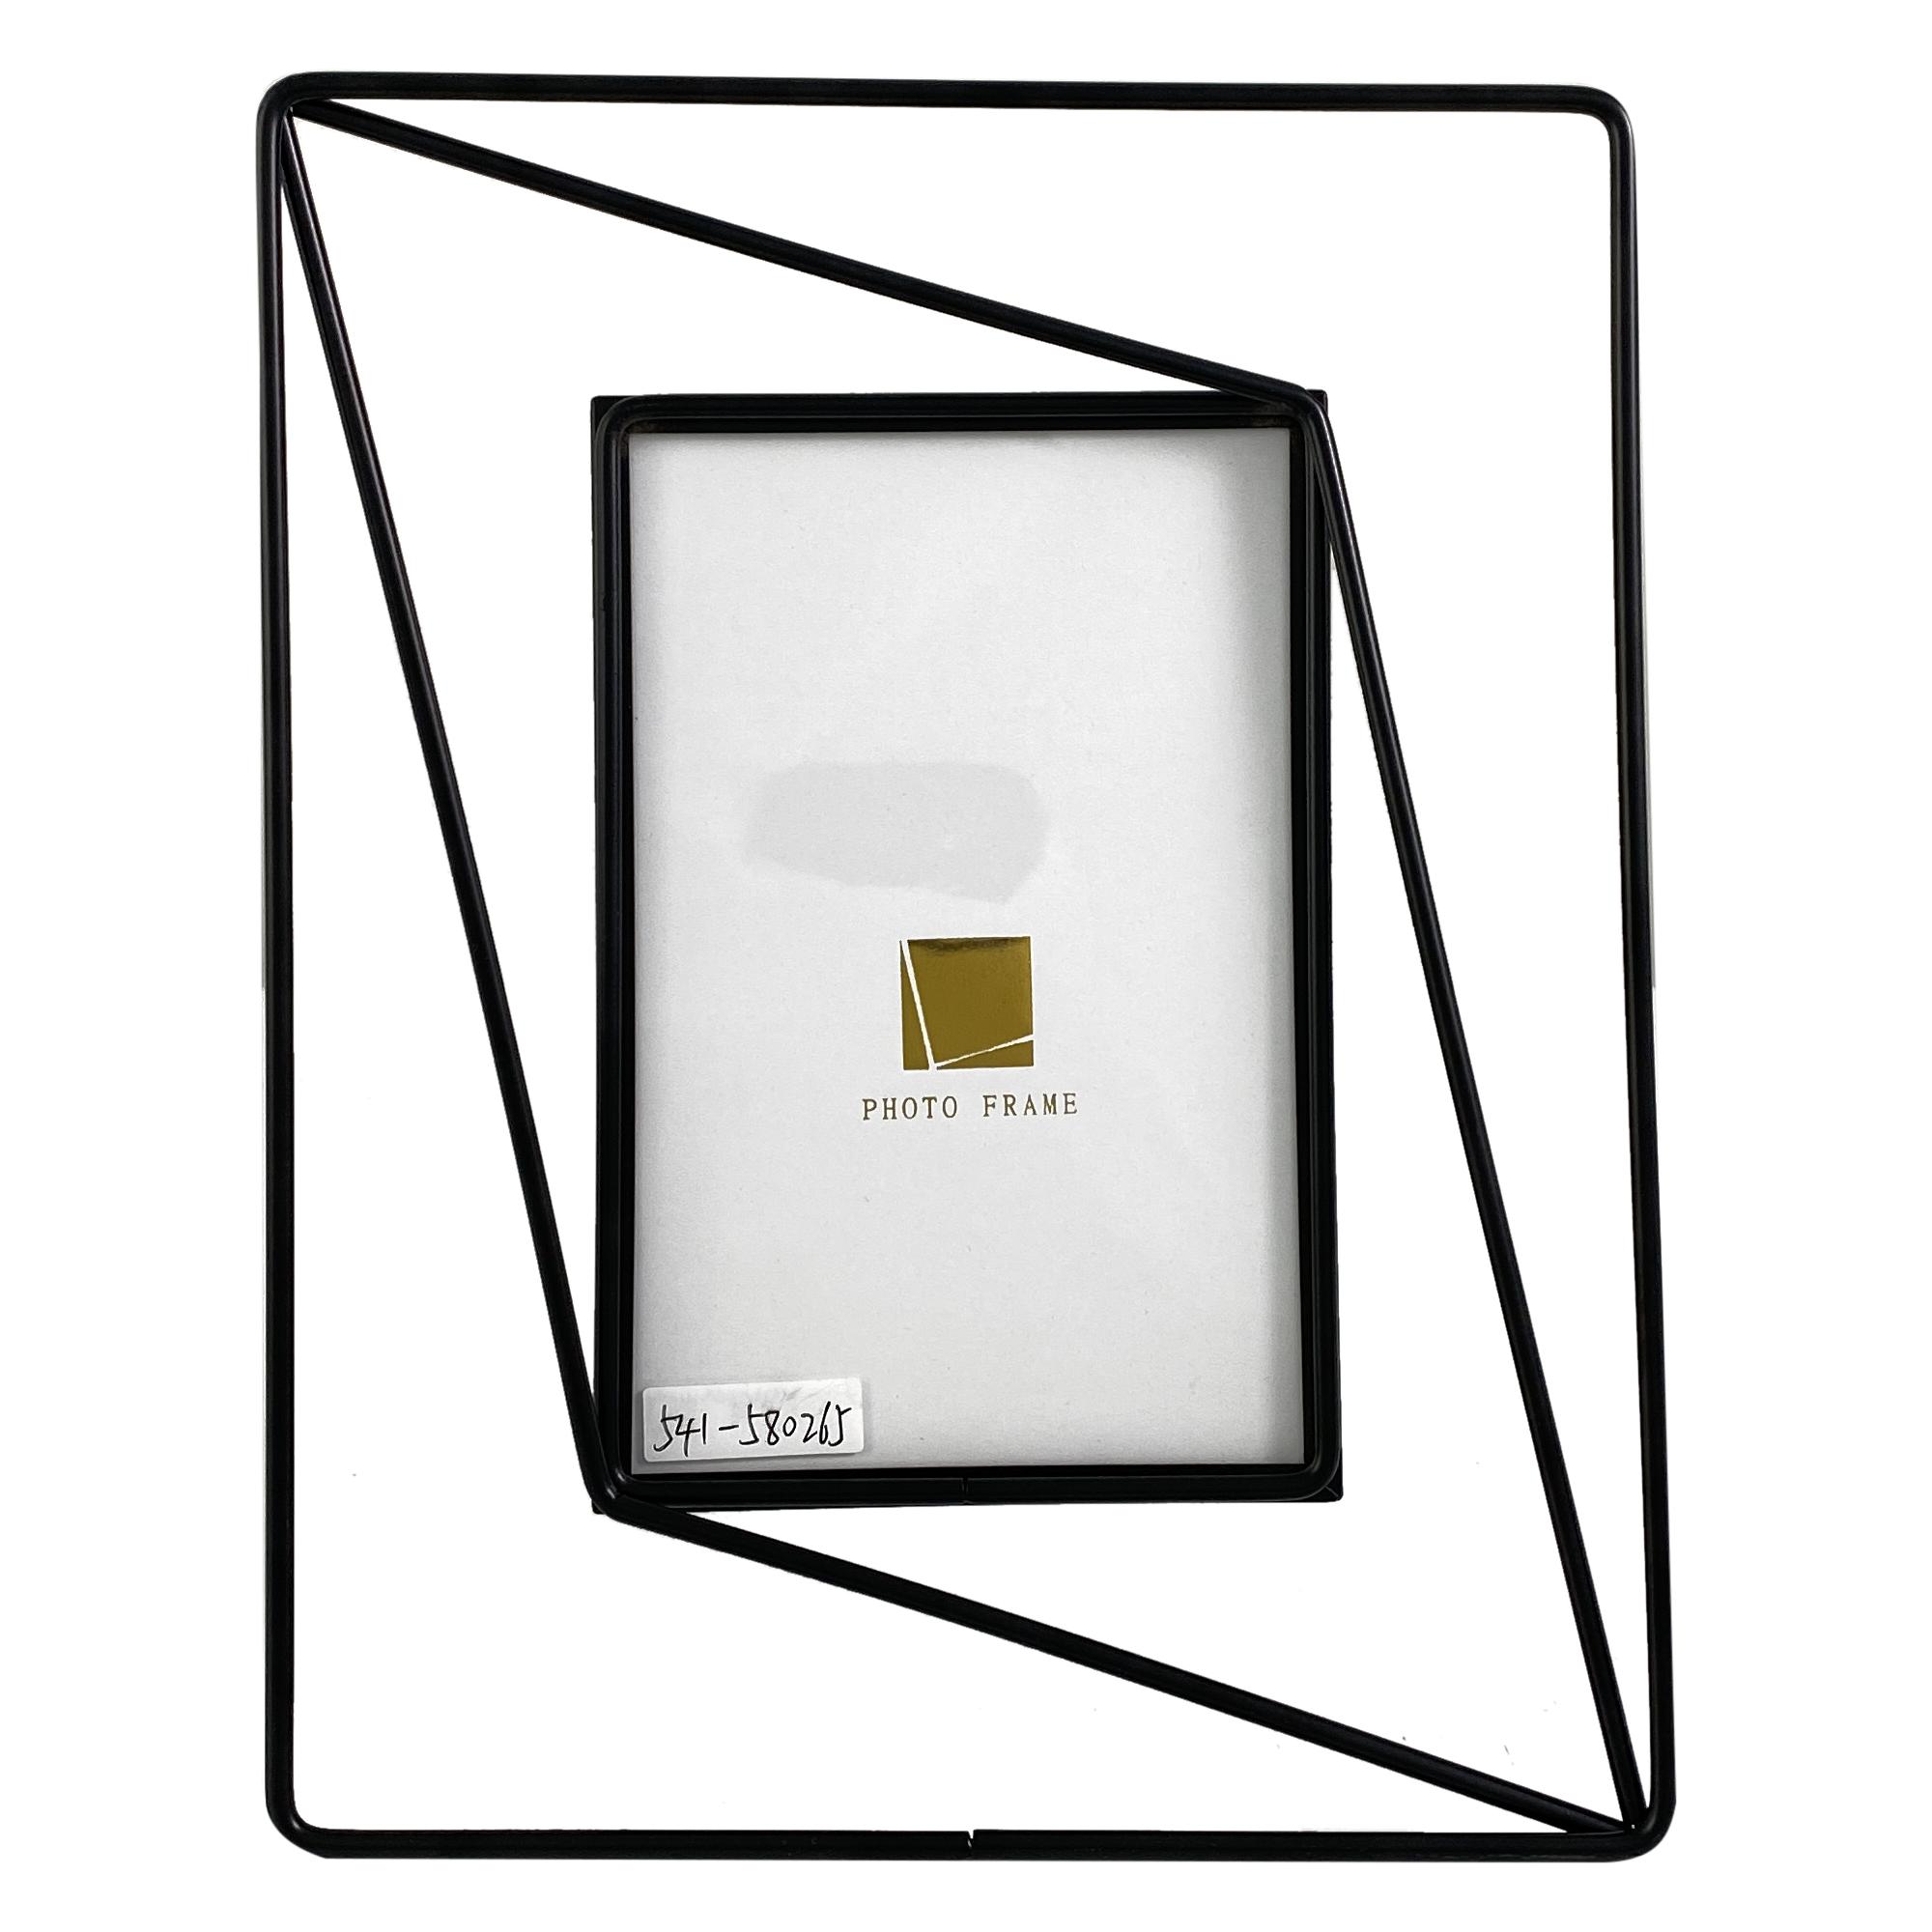 PICTURE FRAME 4X6 18.1X23.1X3.8 - 541-580265